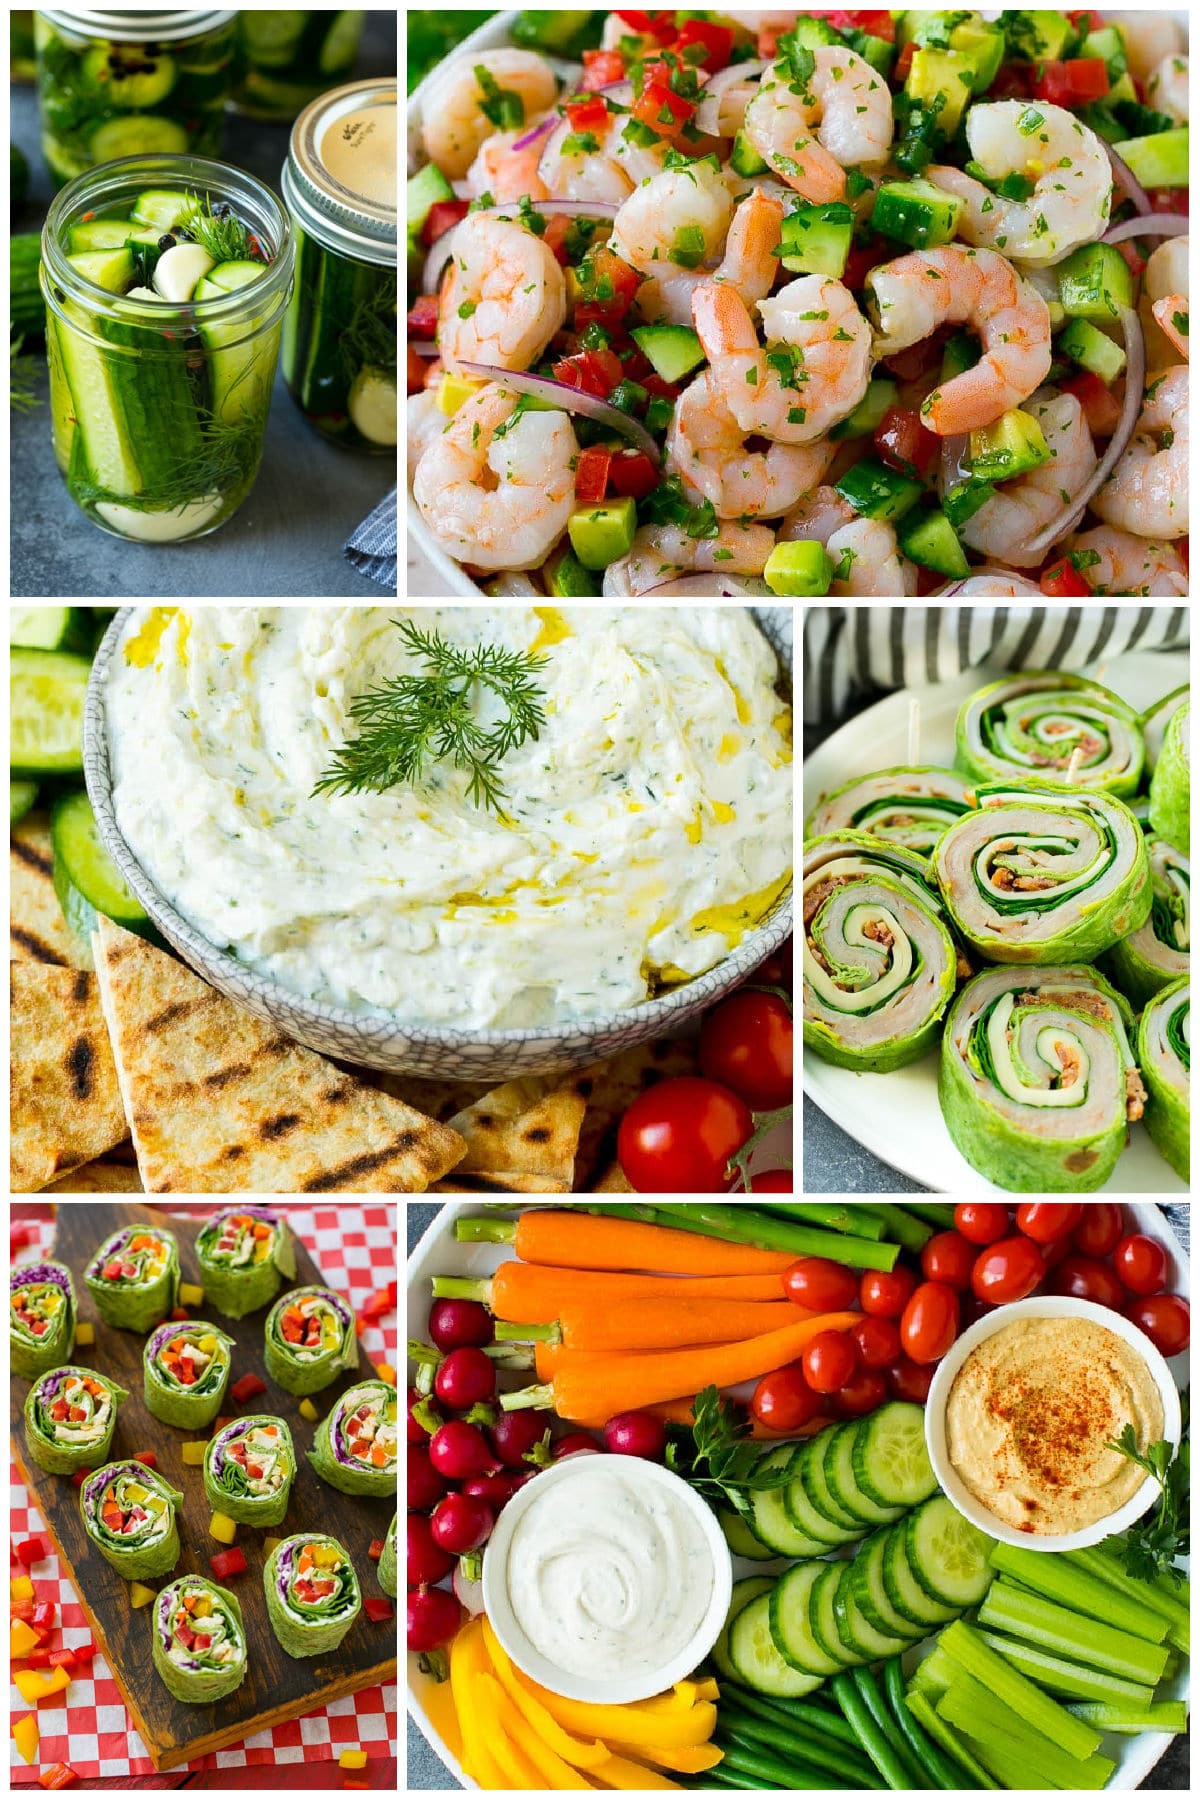 A group of images of healthy foods like shrimp ceviche and turkey roll ups.